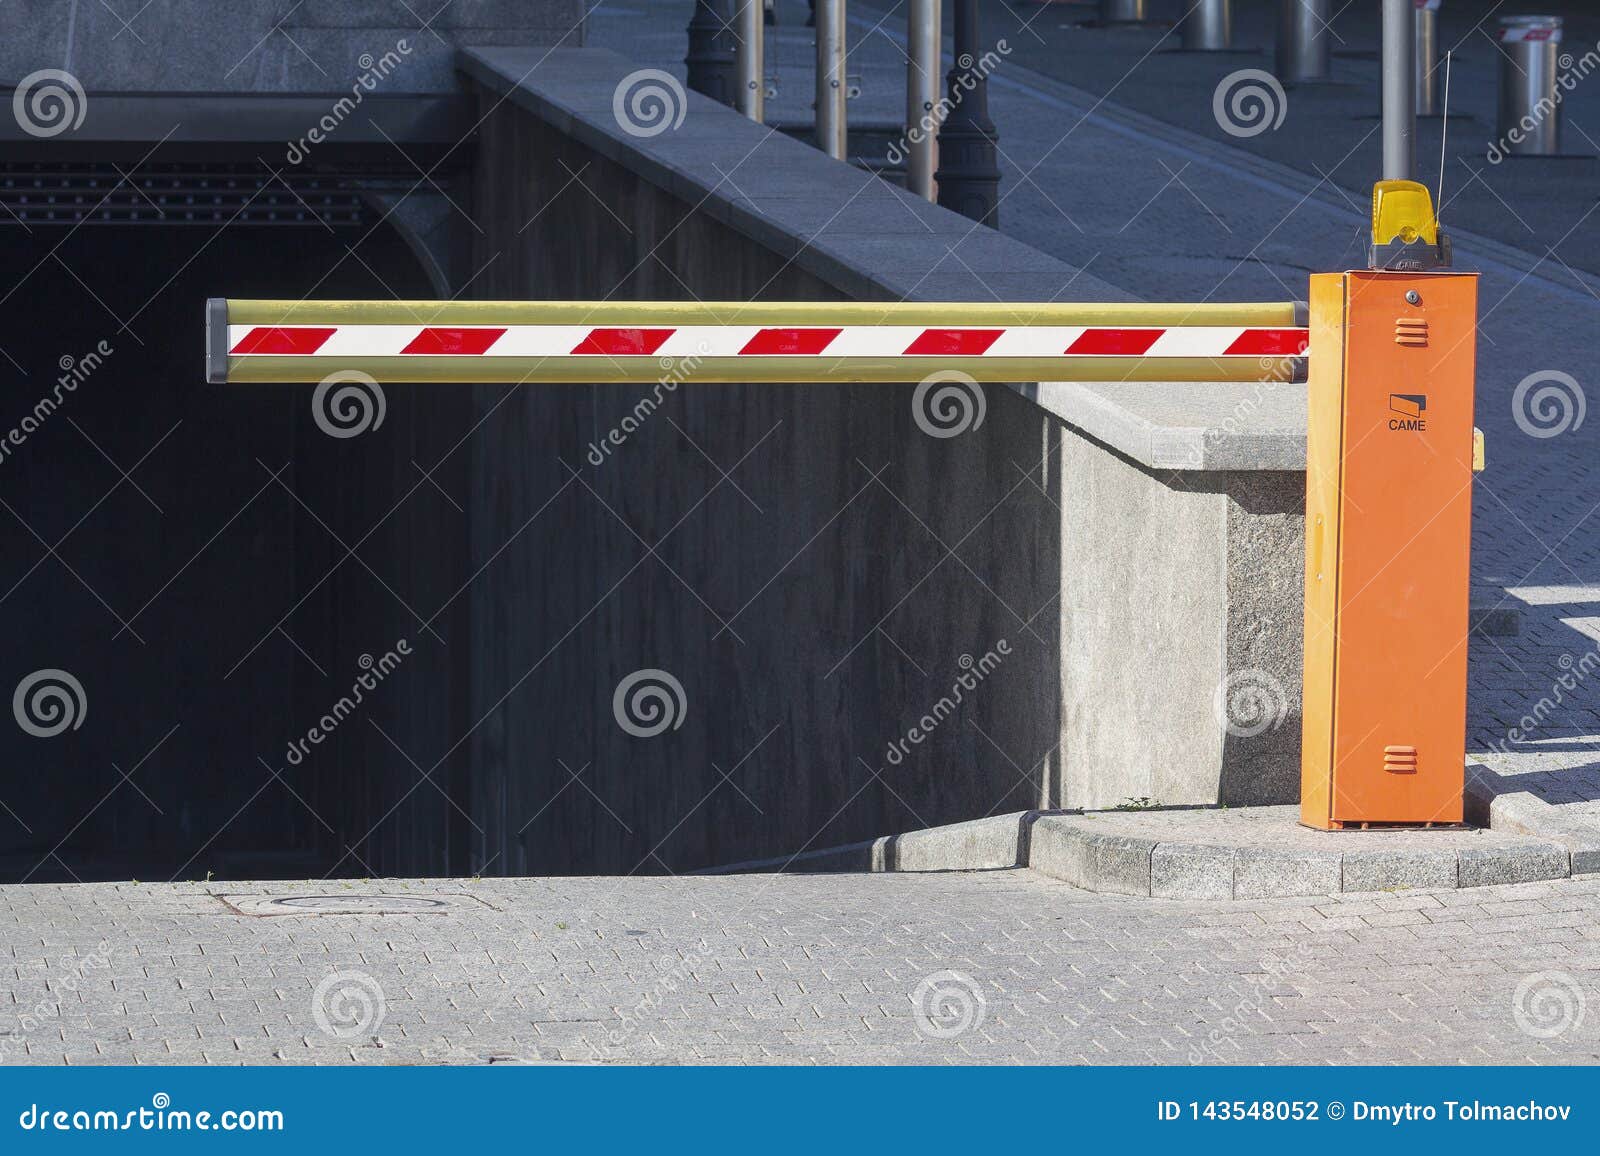 Barrier Parked on a City Street Stock Photo - Image of building, camera ...